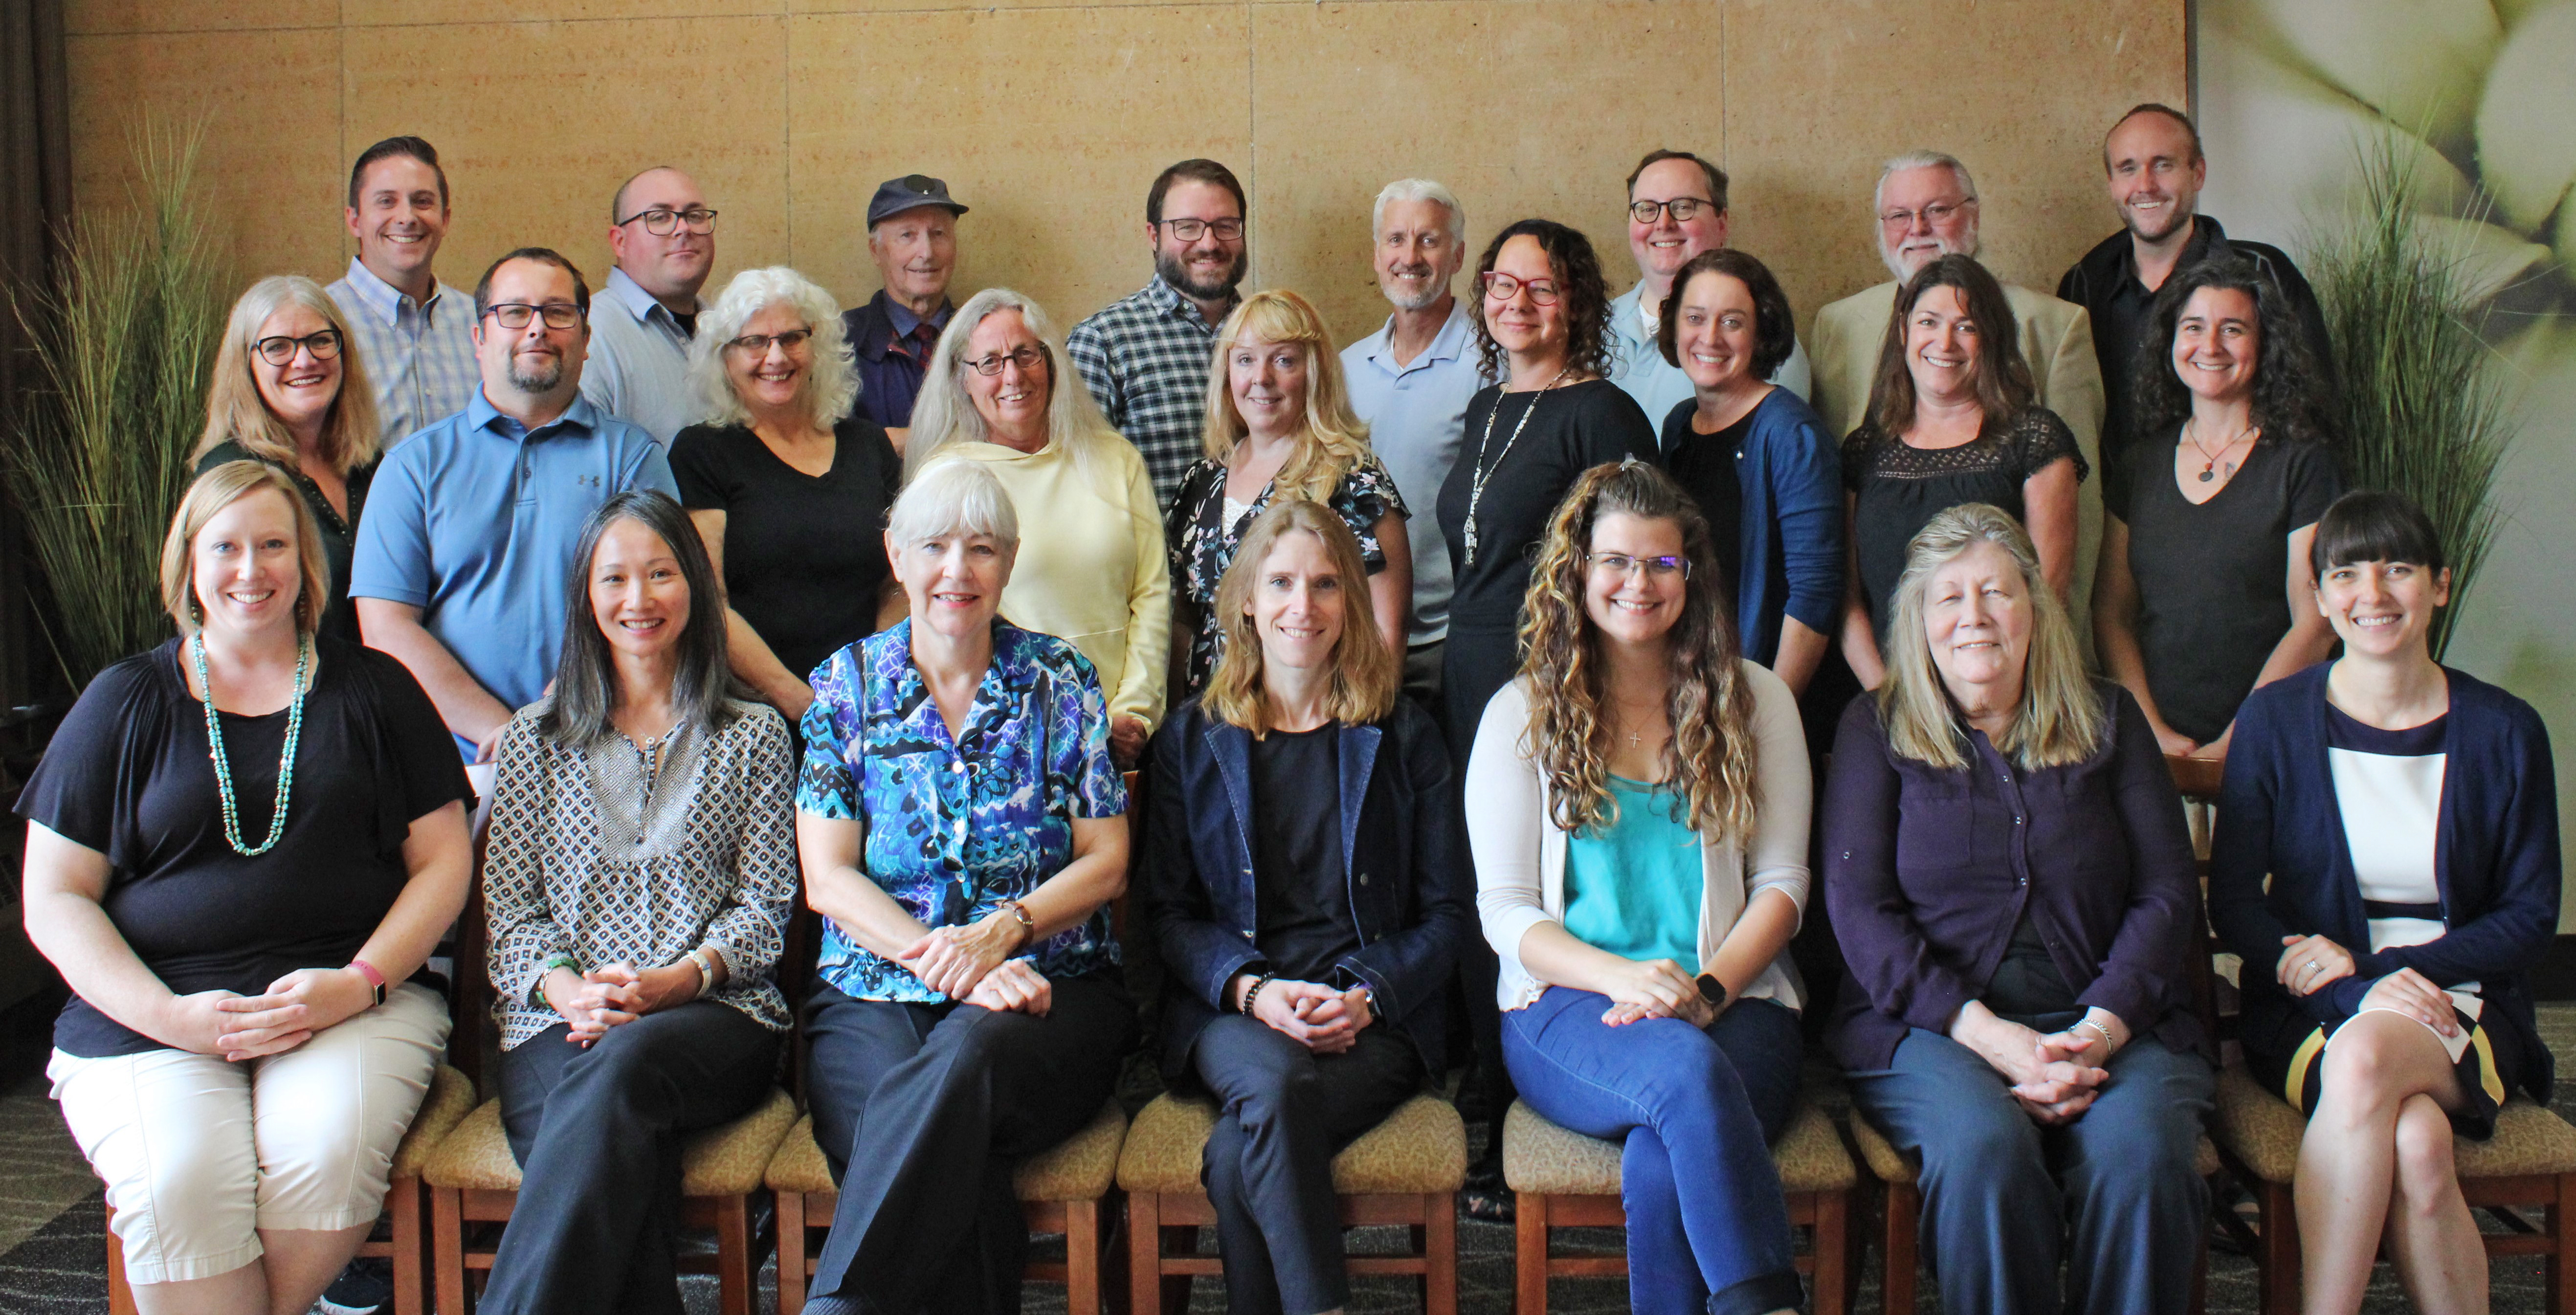 Psychology Department faculty and staff group photo.